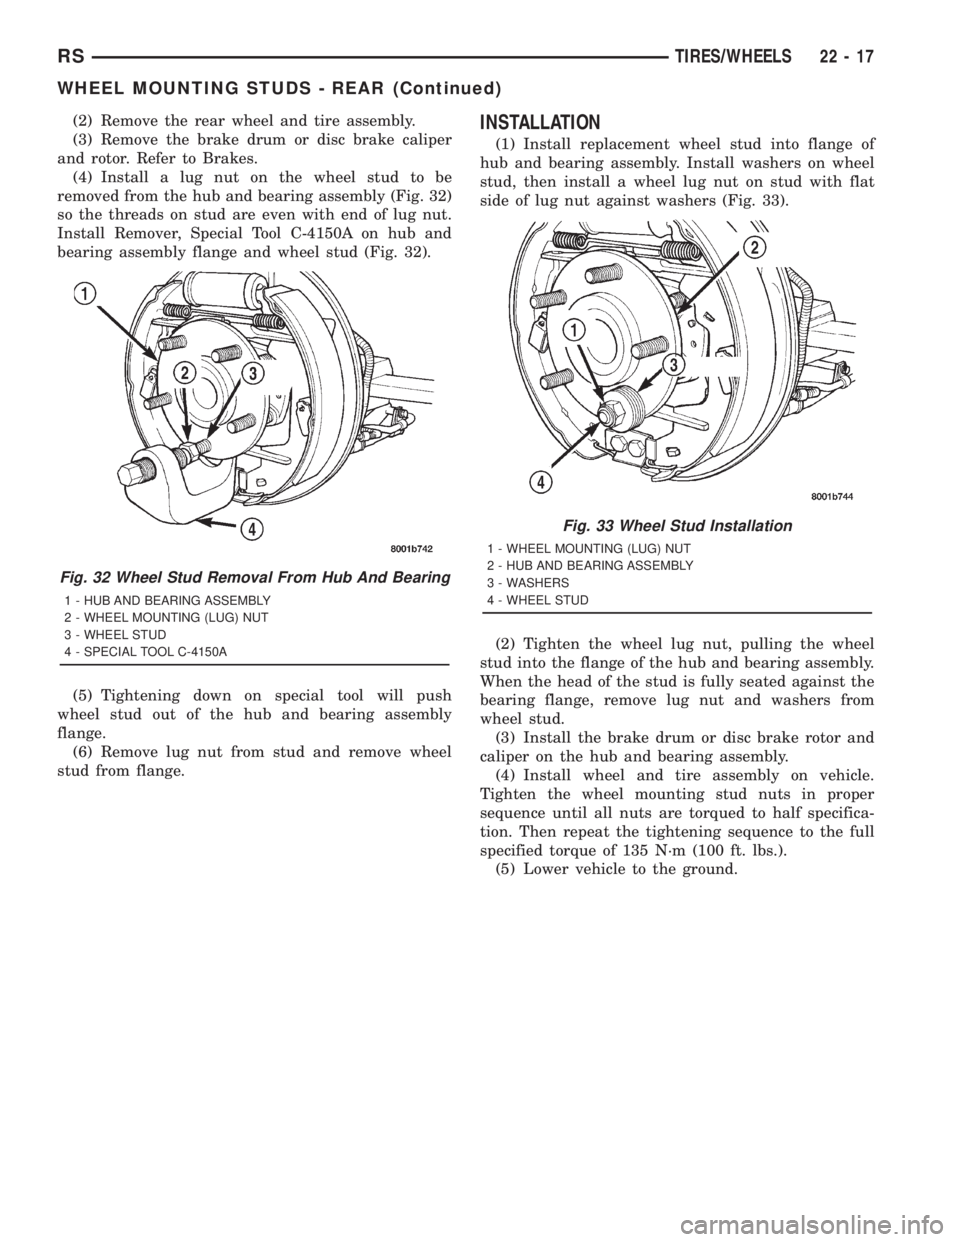 CHRYSLER VOYAGER 2001  Service Manual (2) Remove the rear wheel and tire assembly.
(3) Remove the brake drum or disc brake caliper
and rotor. Refer to Brakes.
(4) Install a lug nut on the wheel stud to be
removed from the hub and bearing 